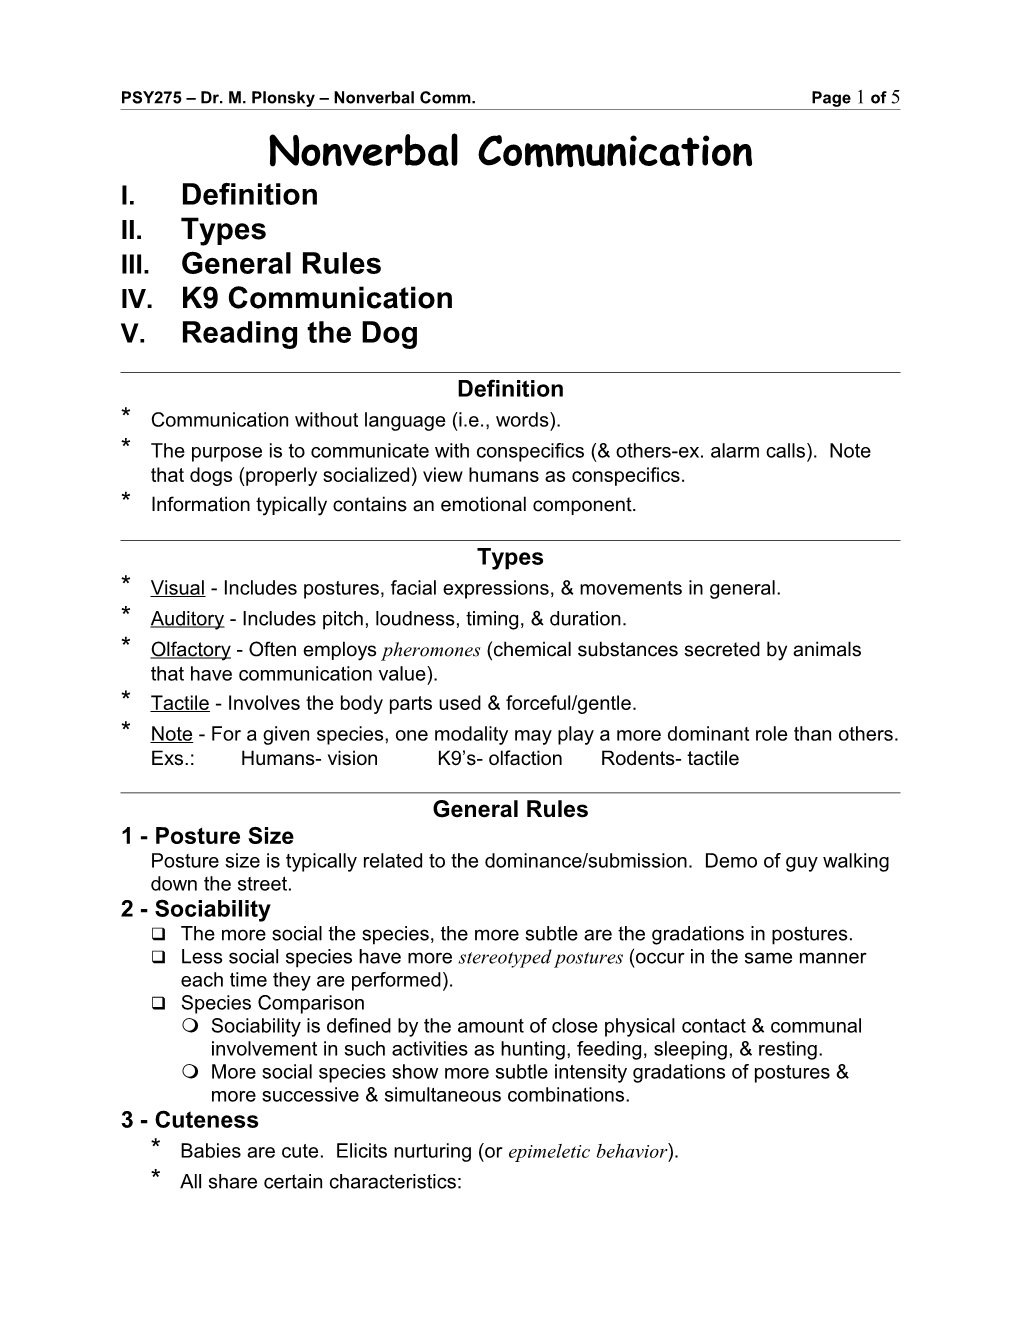 PSY275 Dr. M. Plonsky Nonverbal Comm. Page 5 of 5